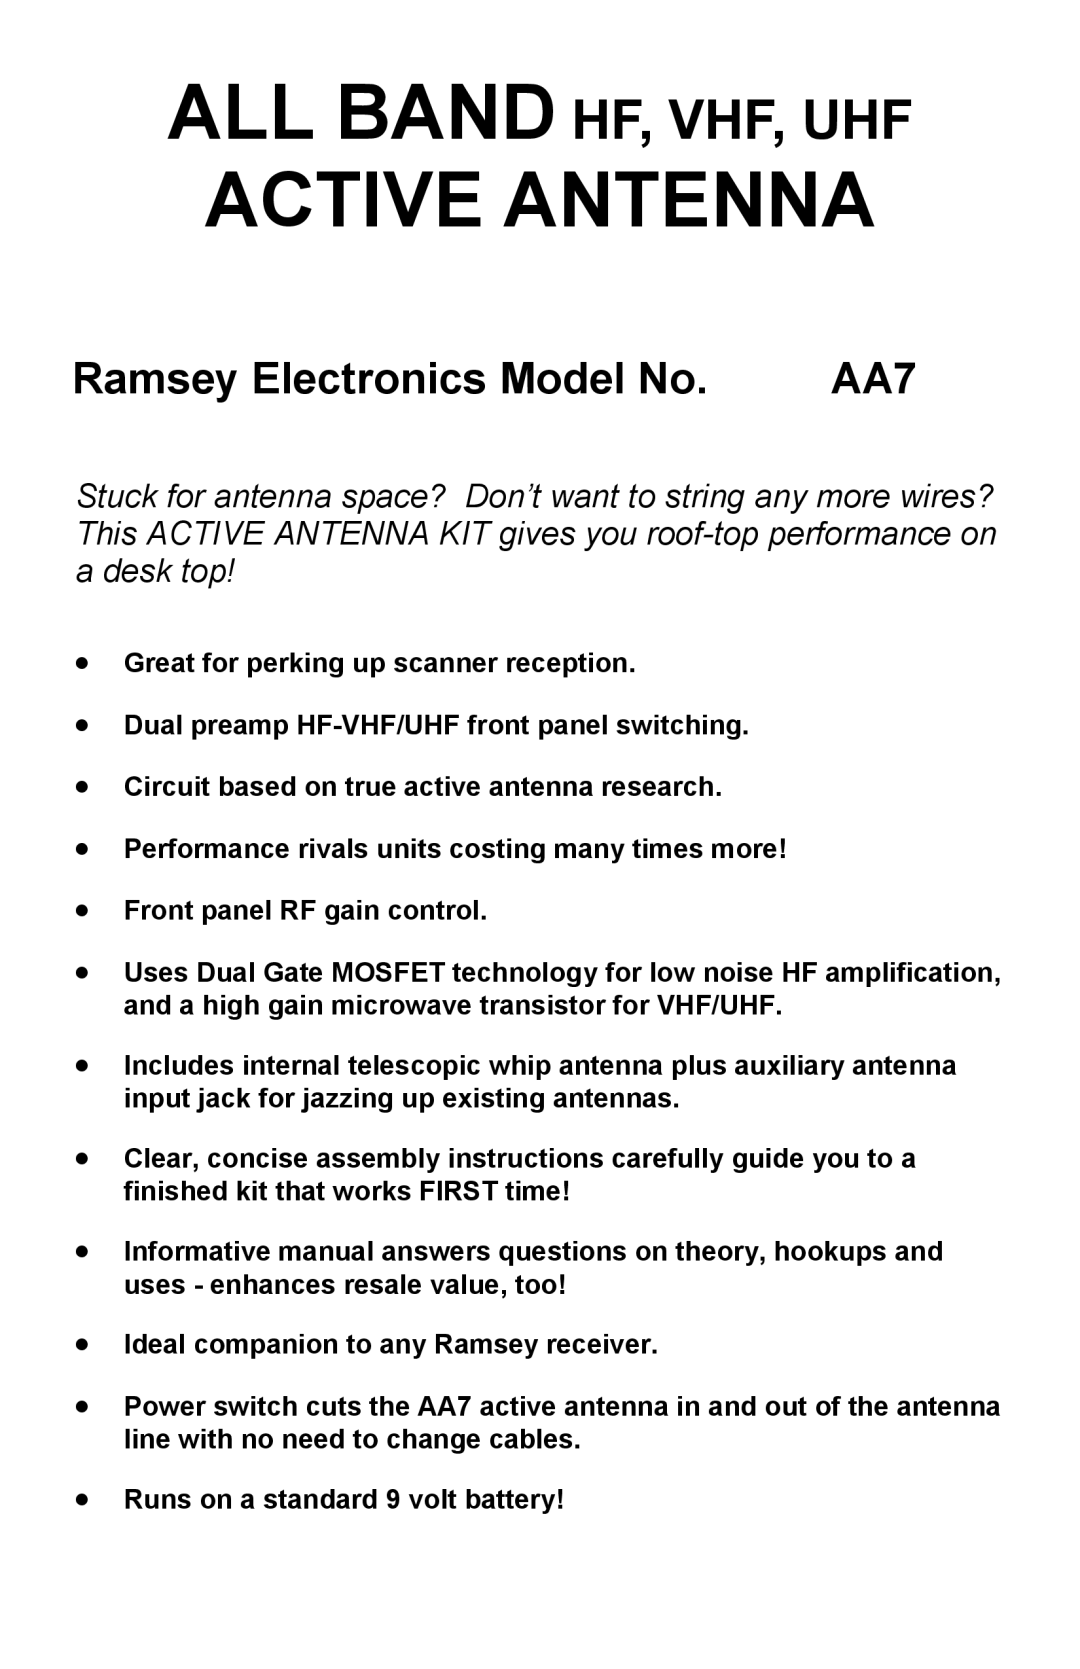 Ramsey Electronics AA7 manual Great for perking up scanner reception, •Dual preamp HF-VHF/UHFfront panel switching 